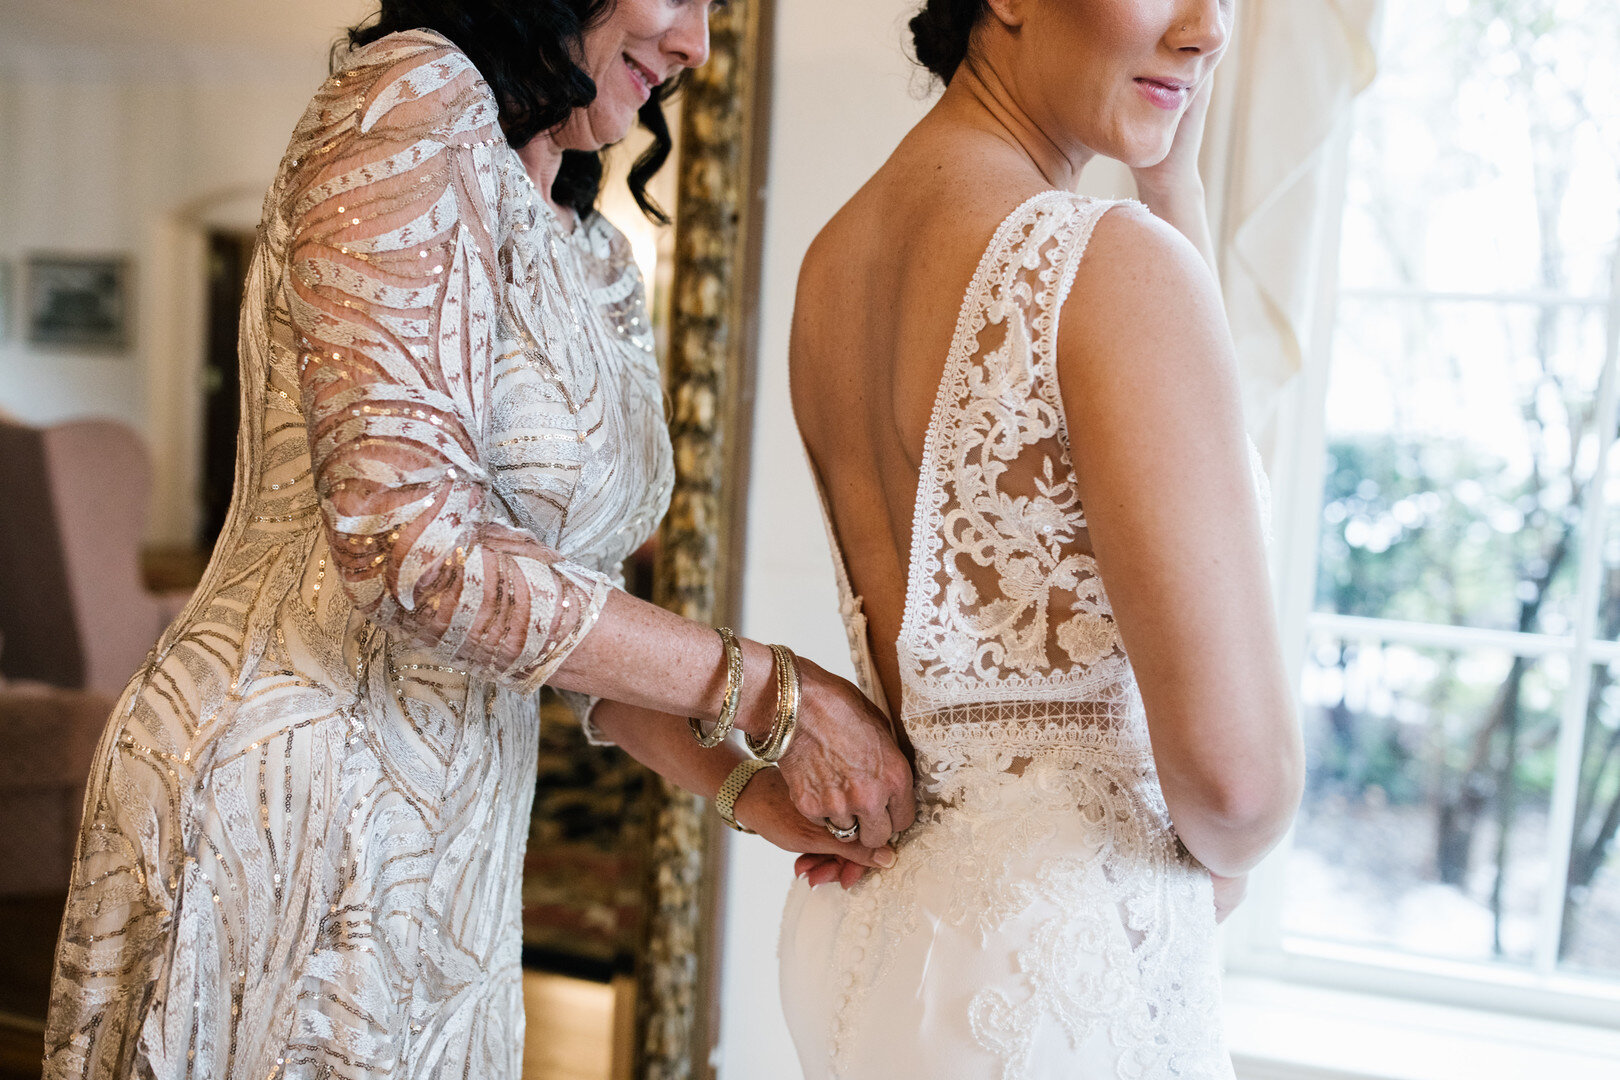 Lace wedding dress details: Chicago spring wedding captured by Hannah Rose Gray Photography. See more timeless wedding ideas on CHItheeWED.com!